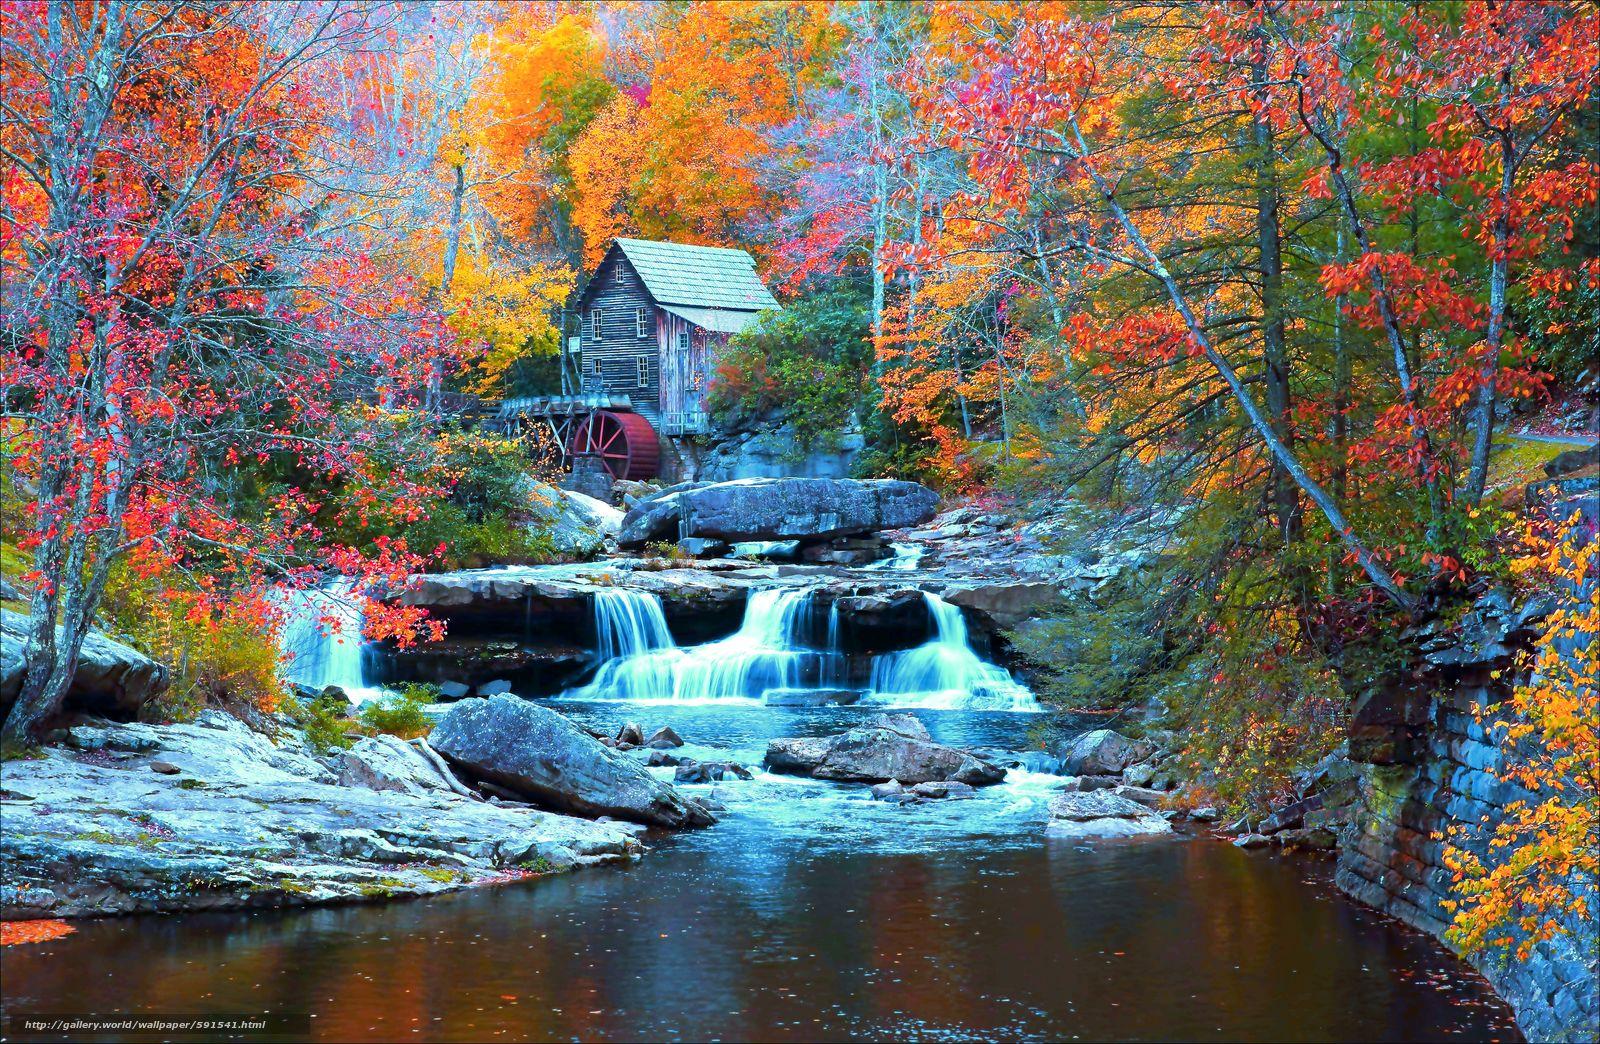 Download wallpaper Glade Creek Grist Mill, Babcock State